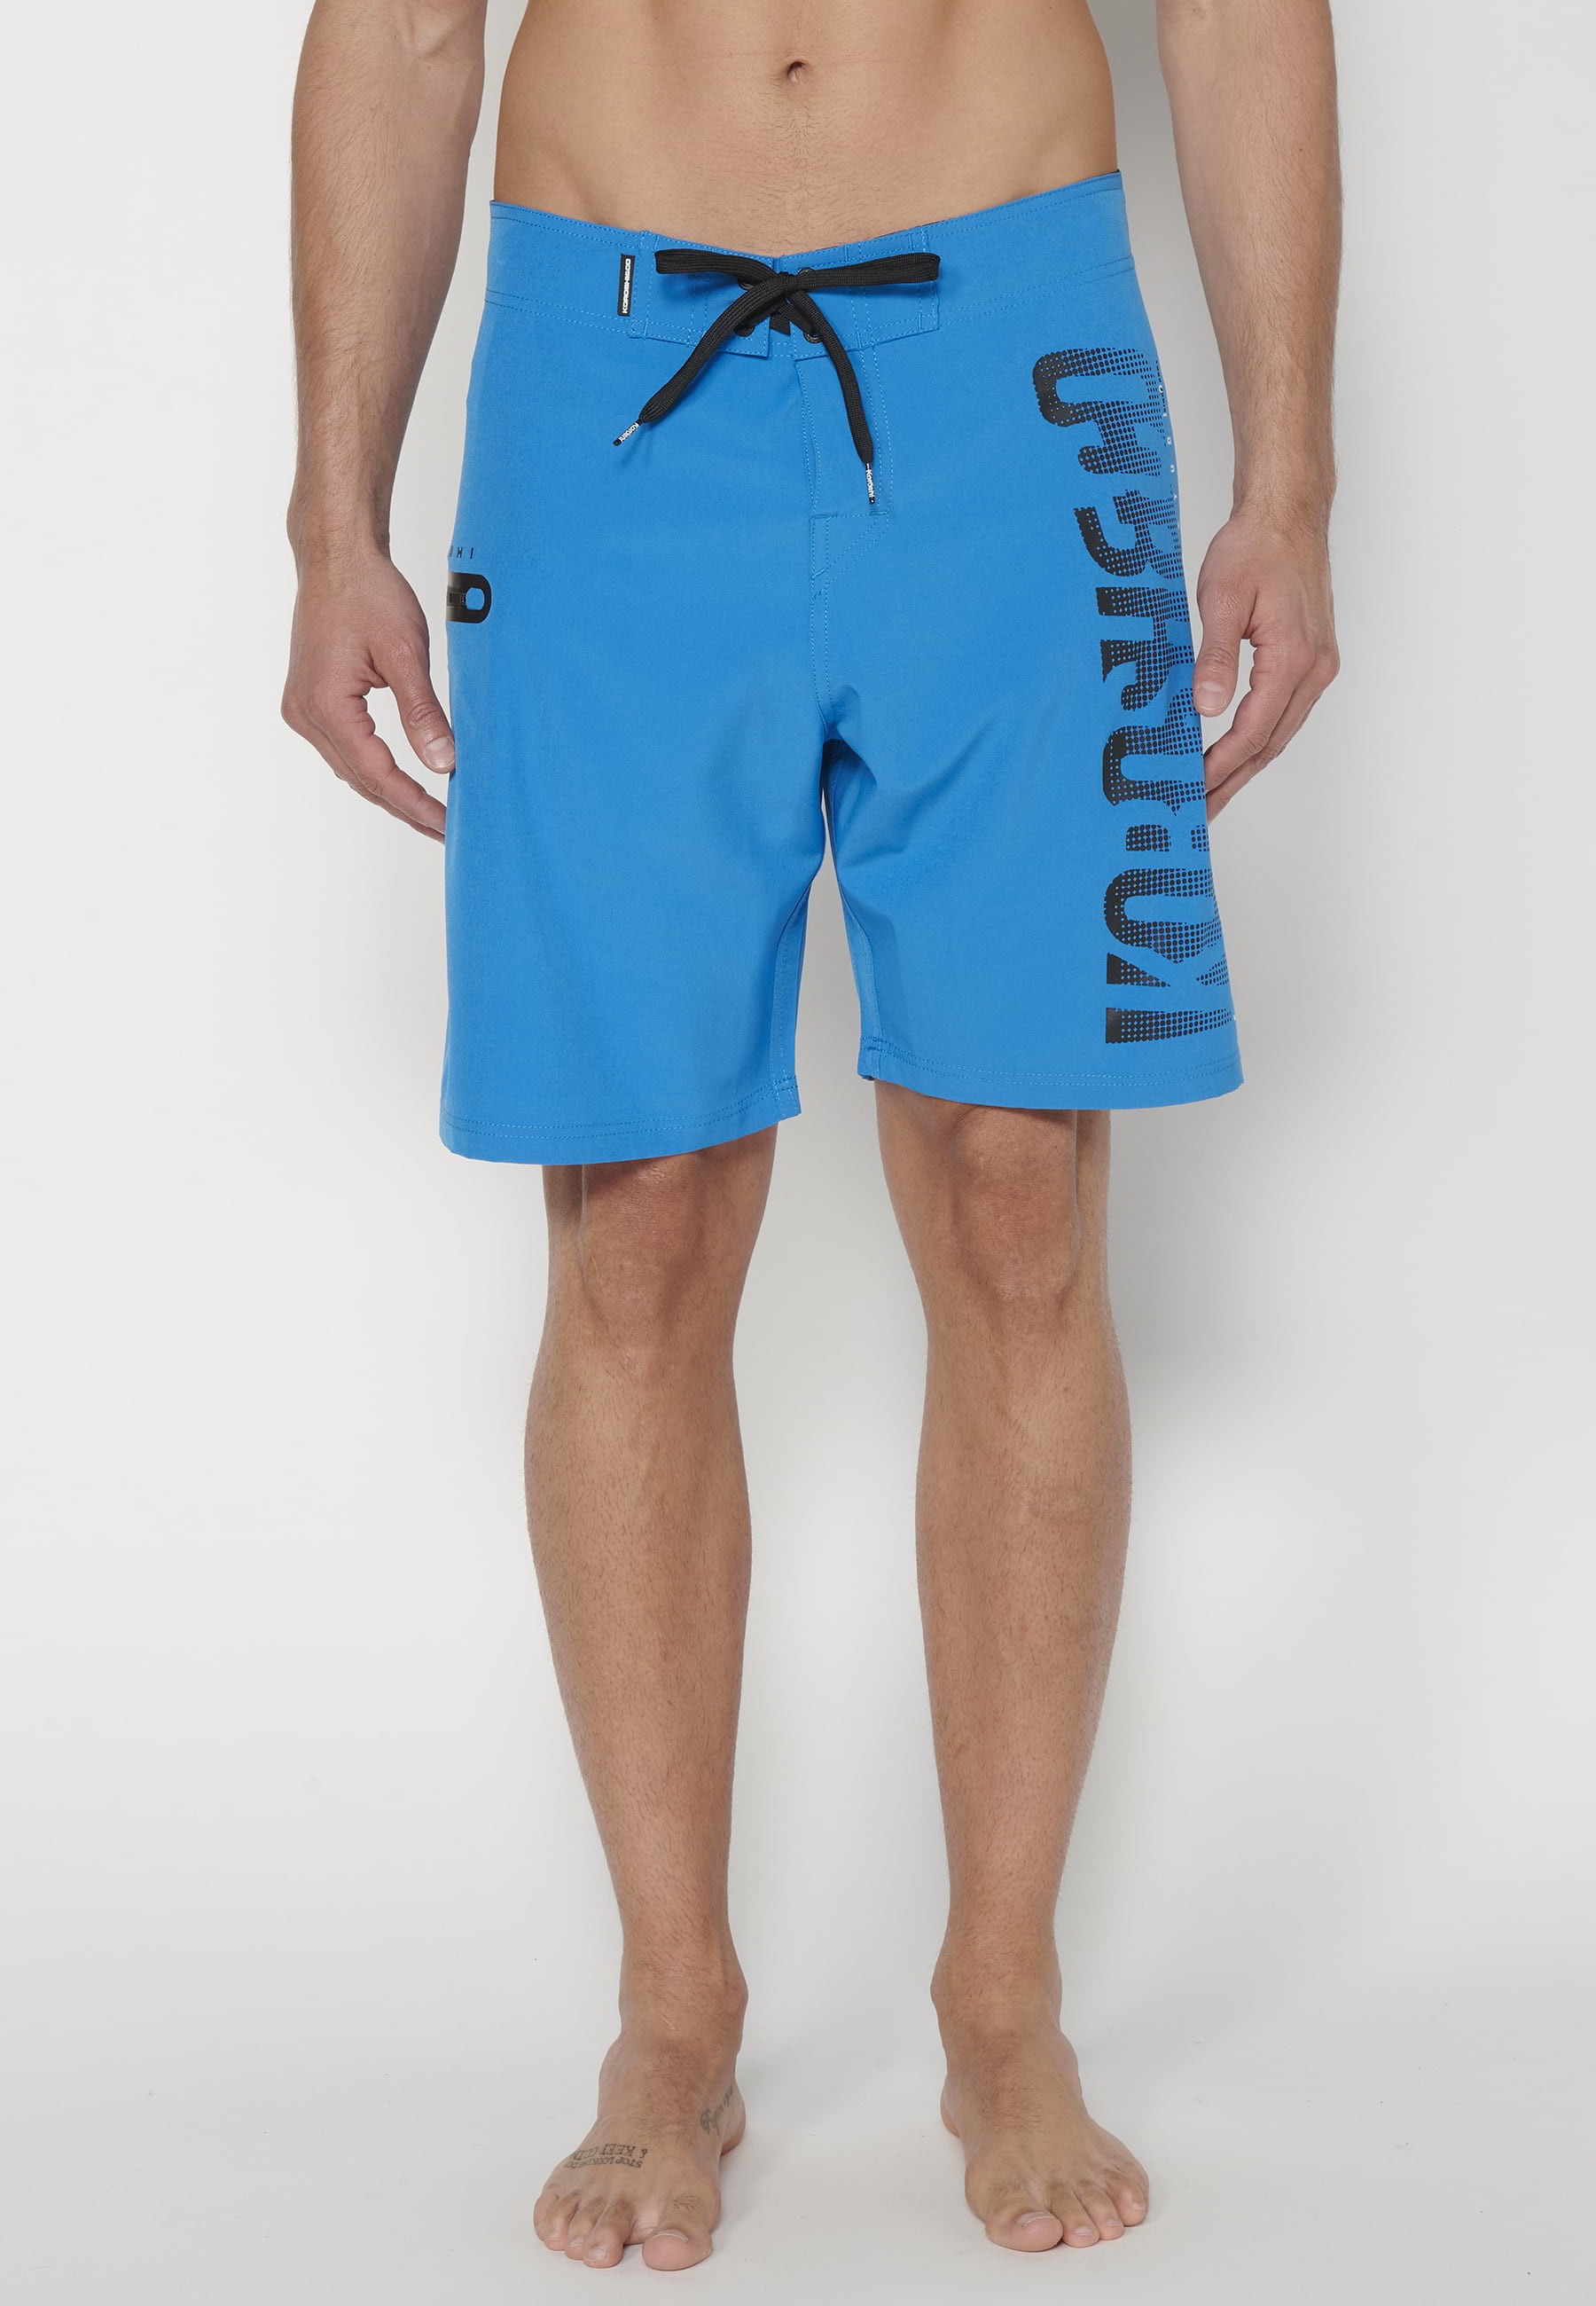 Short Surfer-style swimsuit with three Pockets in Blue color for Men